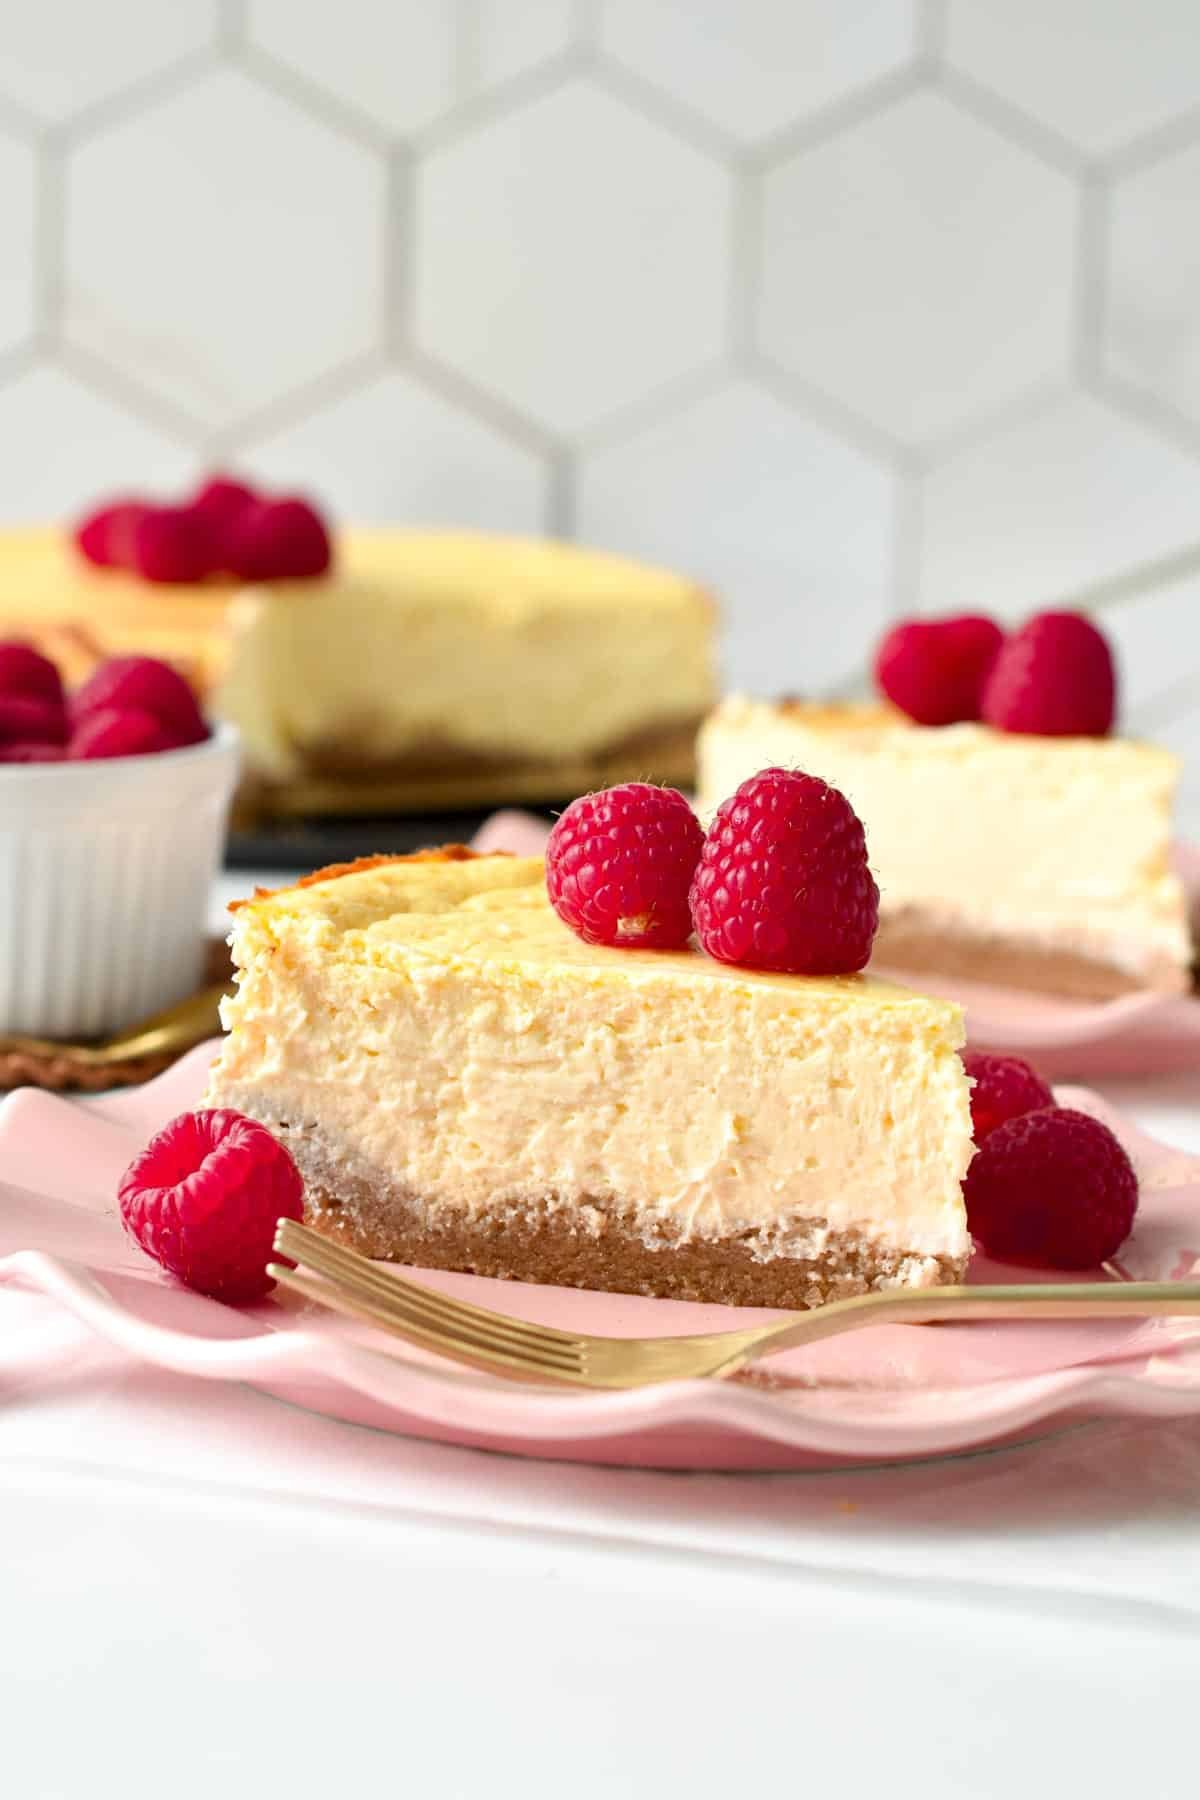 A slice of healthy cheesecake decorated with fresh raspberries.